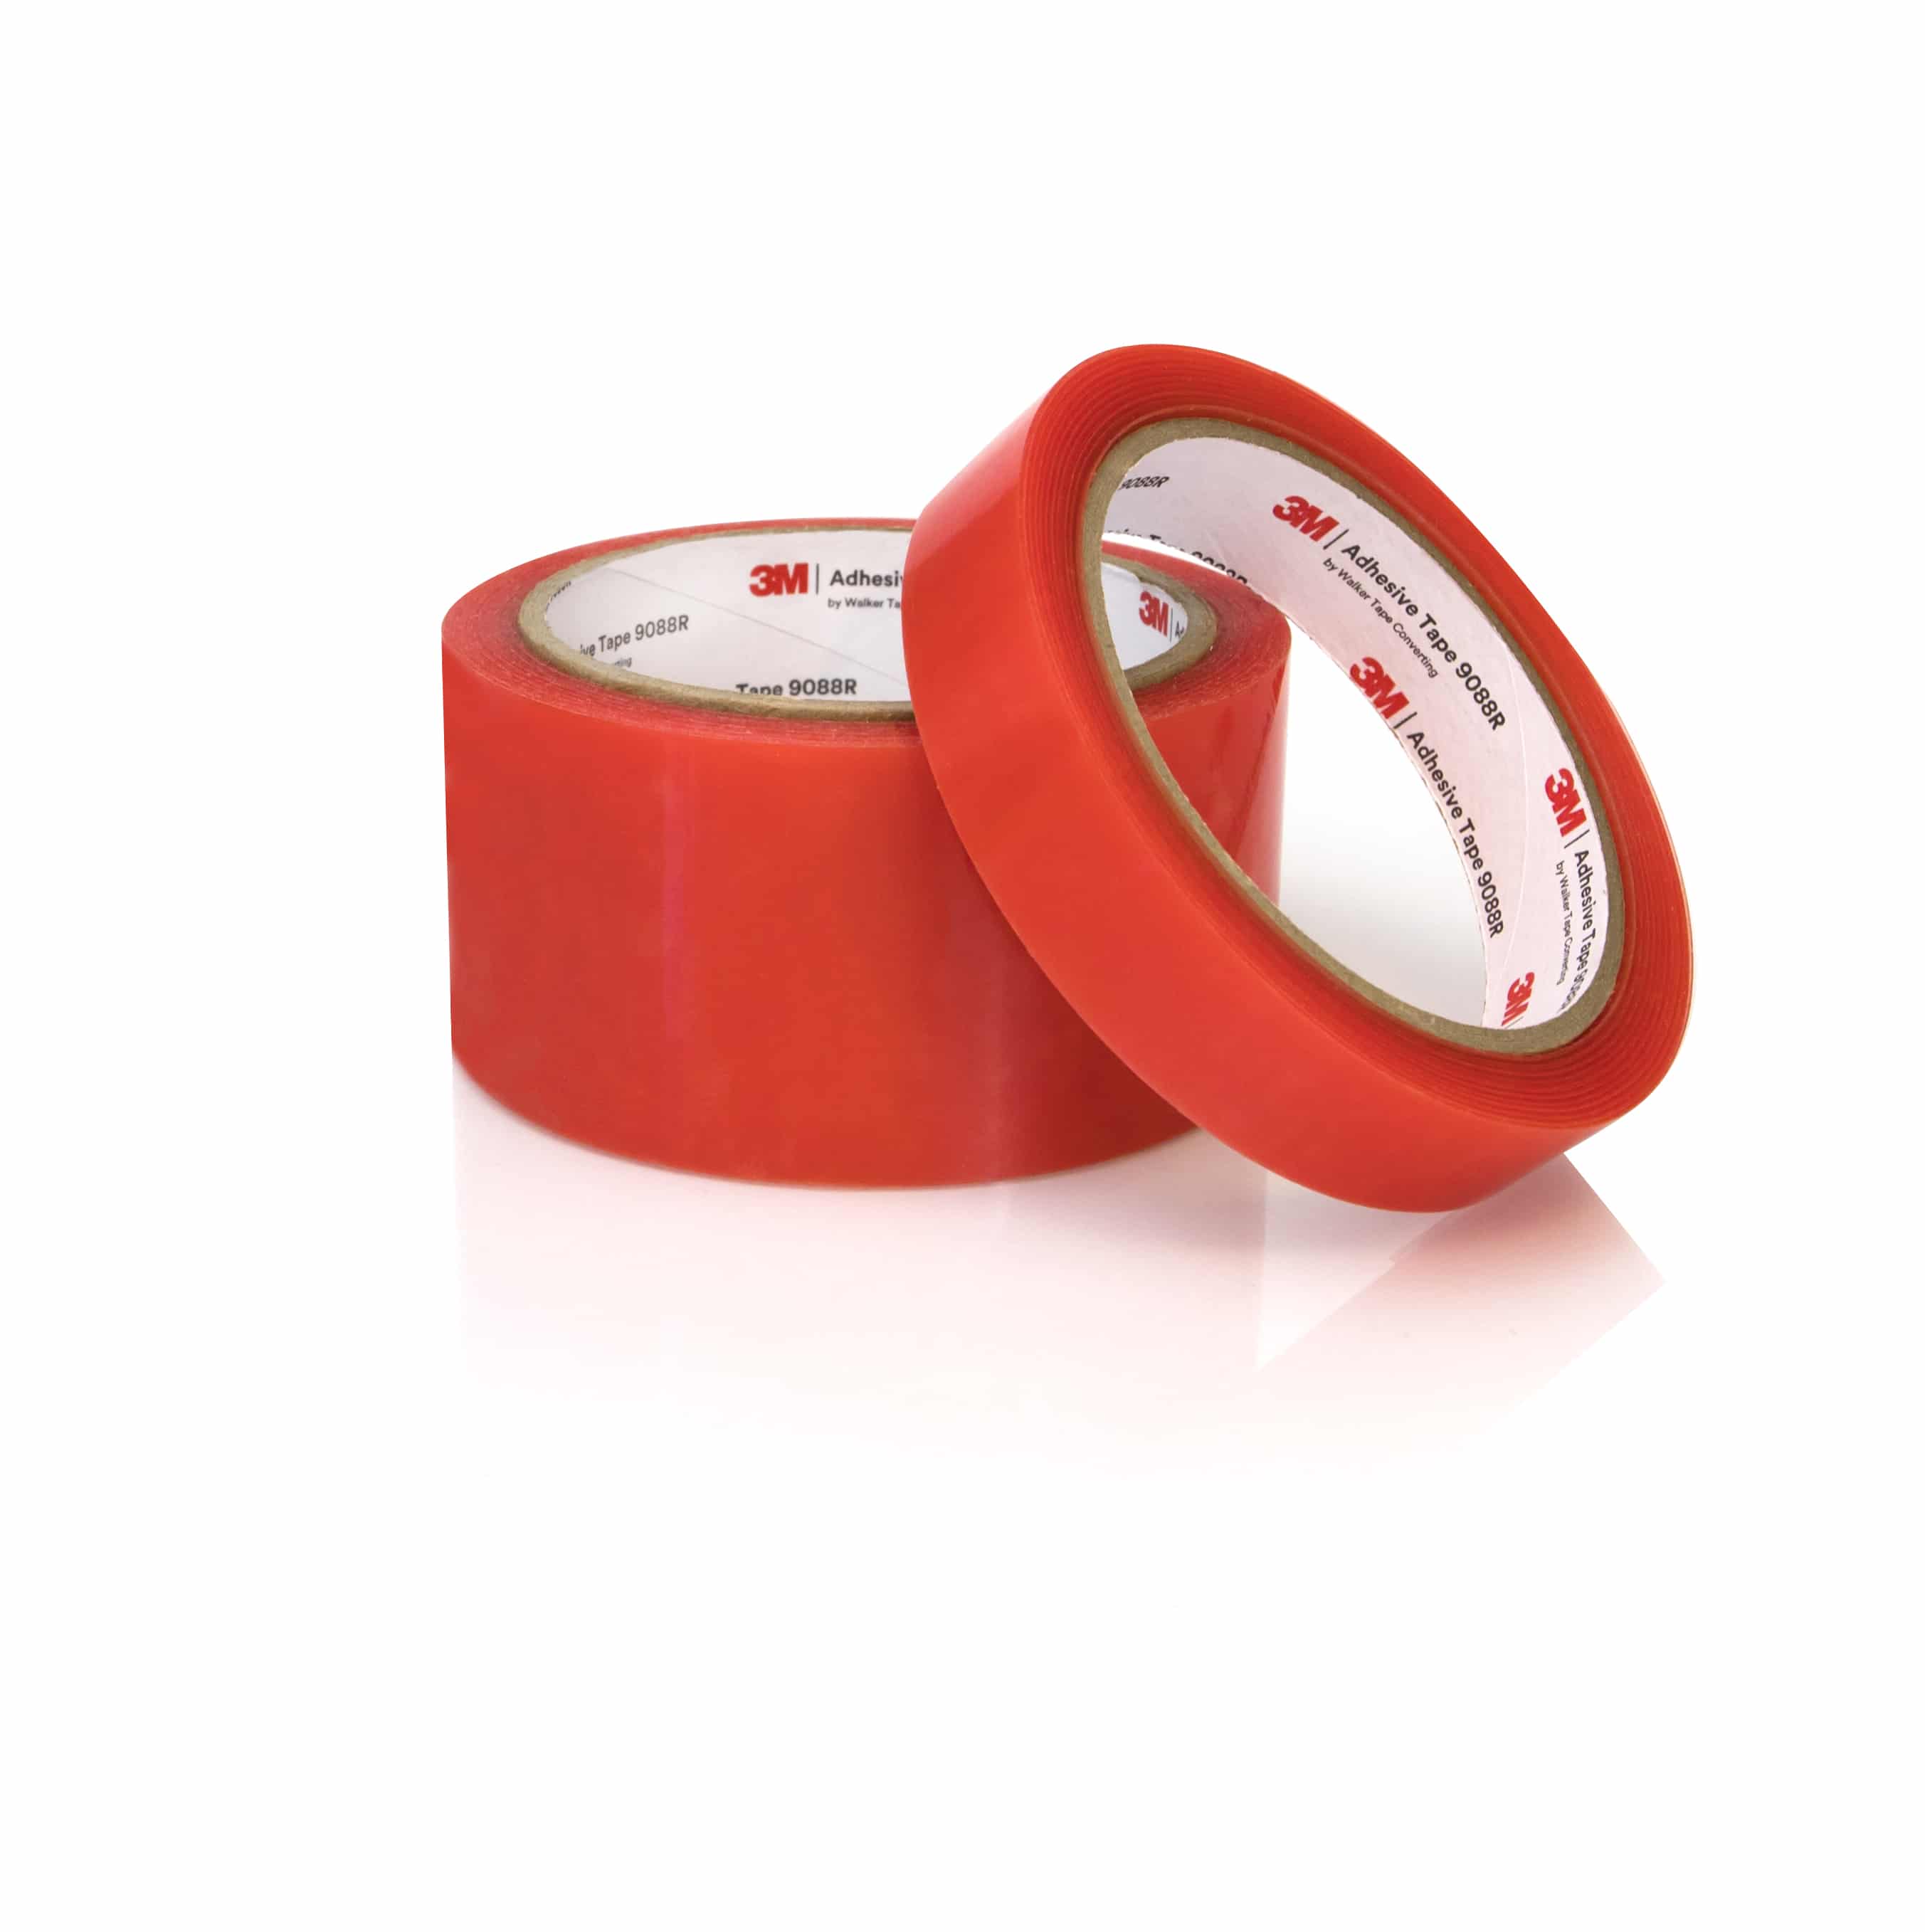 3M™ Adhesive Tape 9088R by Walker Tape Converting